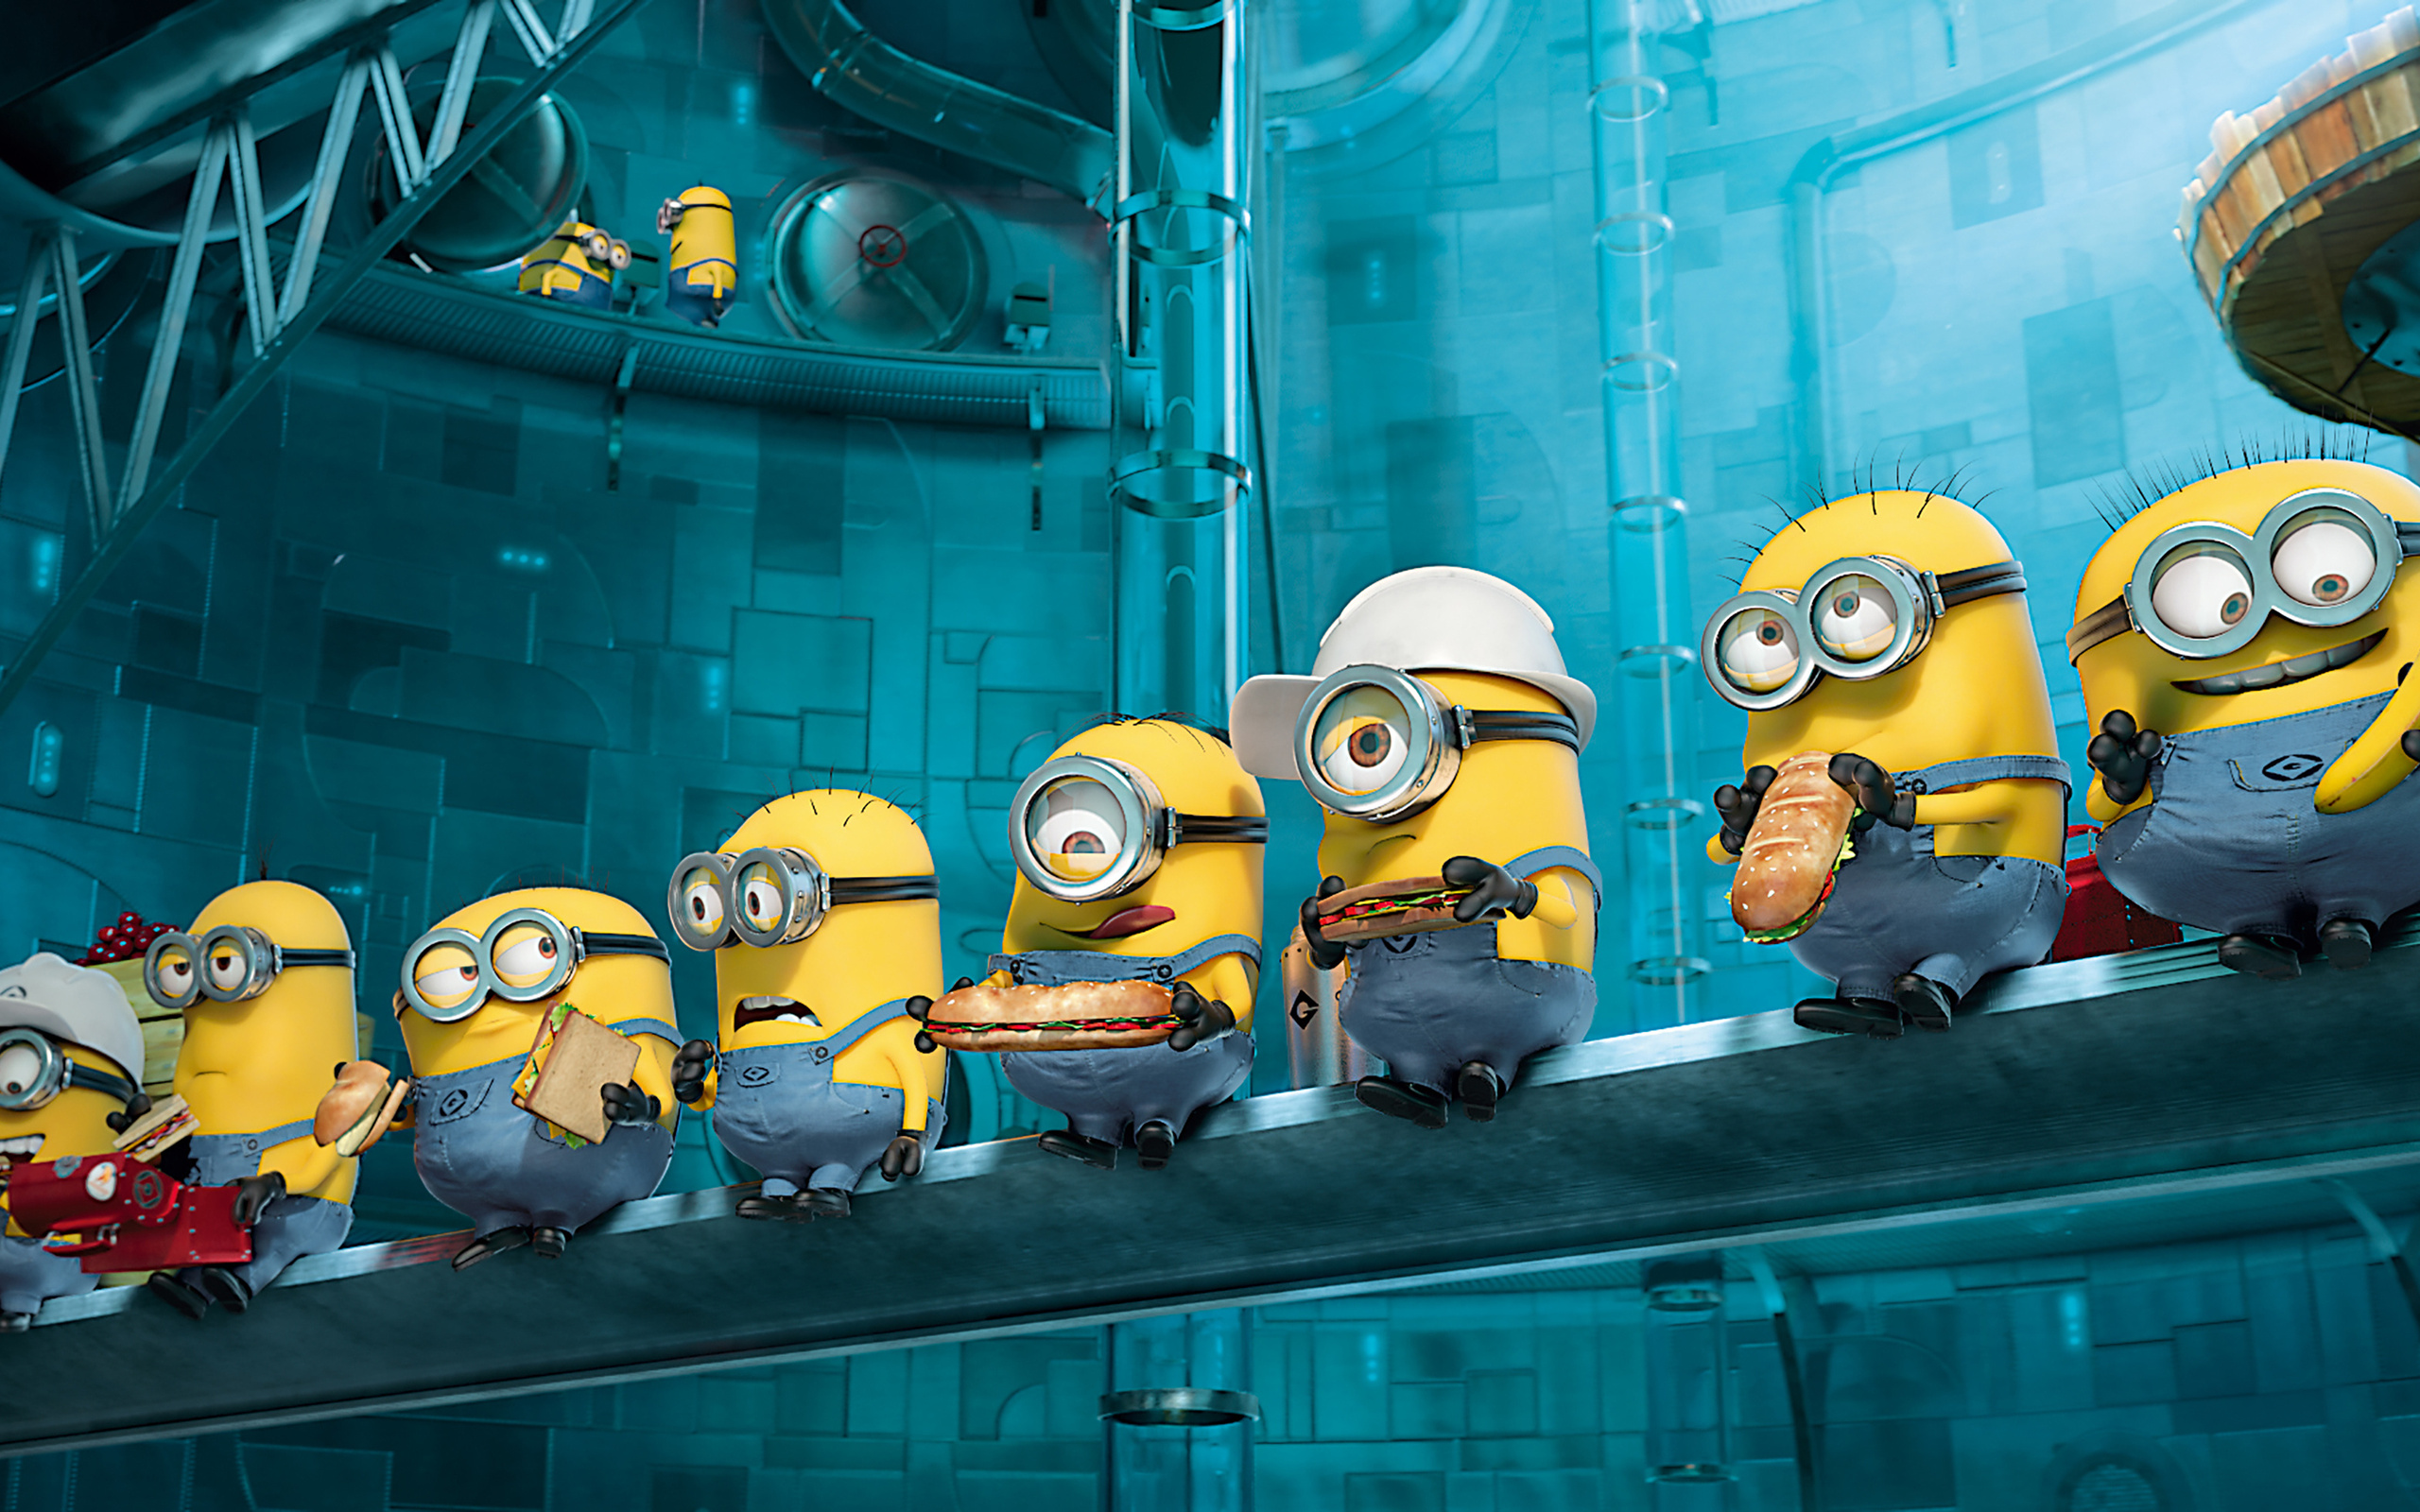 android despicable me, despicable me 2, movie